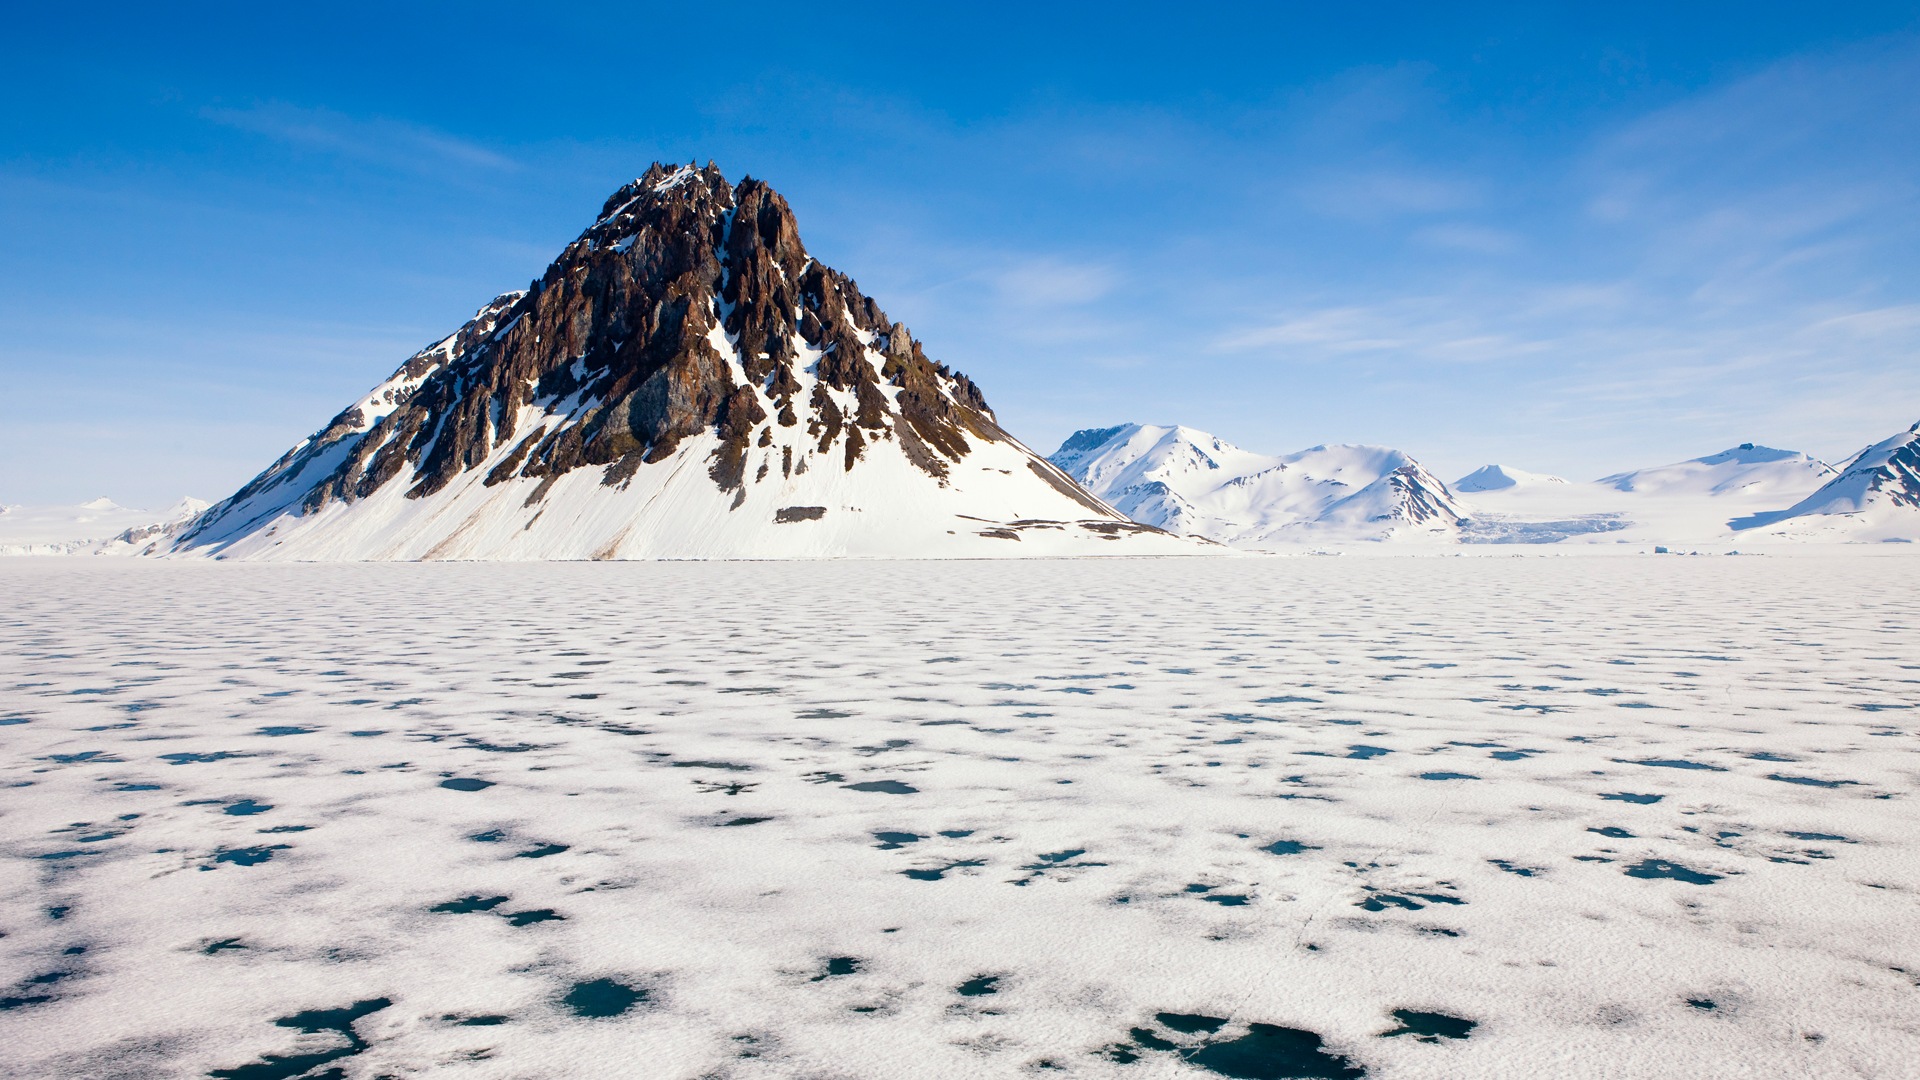 Windows 8 Wallpapers: Arctic, the nature ecological landscape, arctic animals #1 - 1920x1080